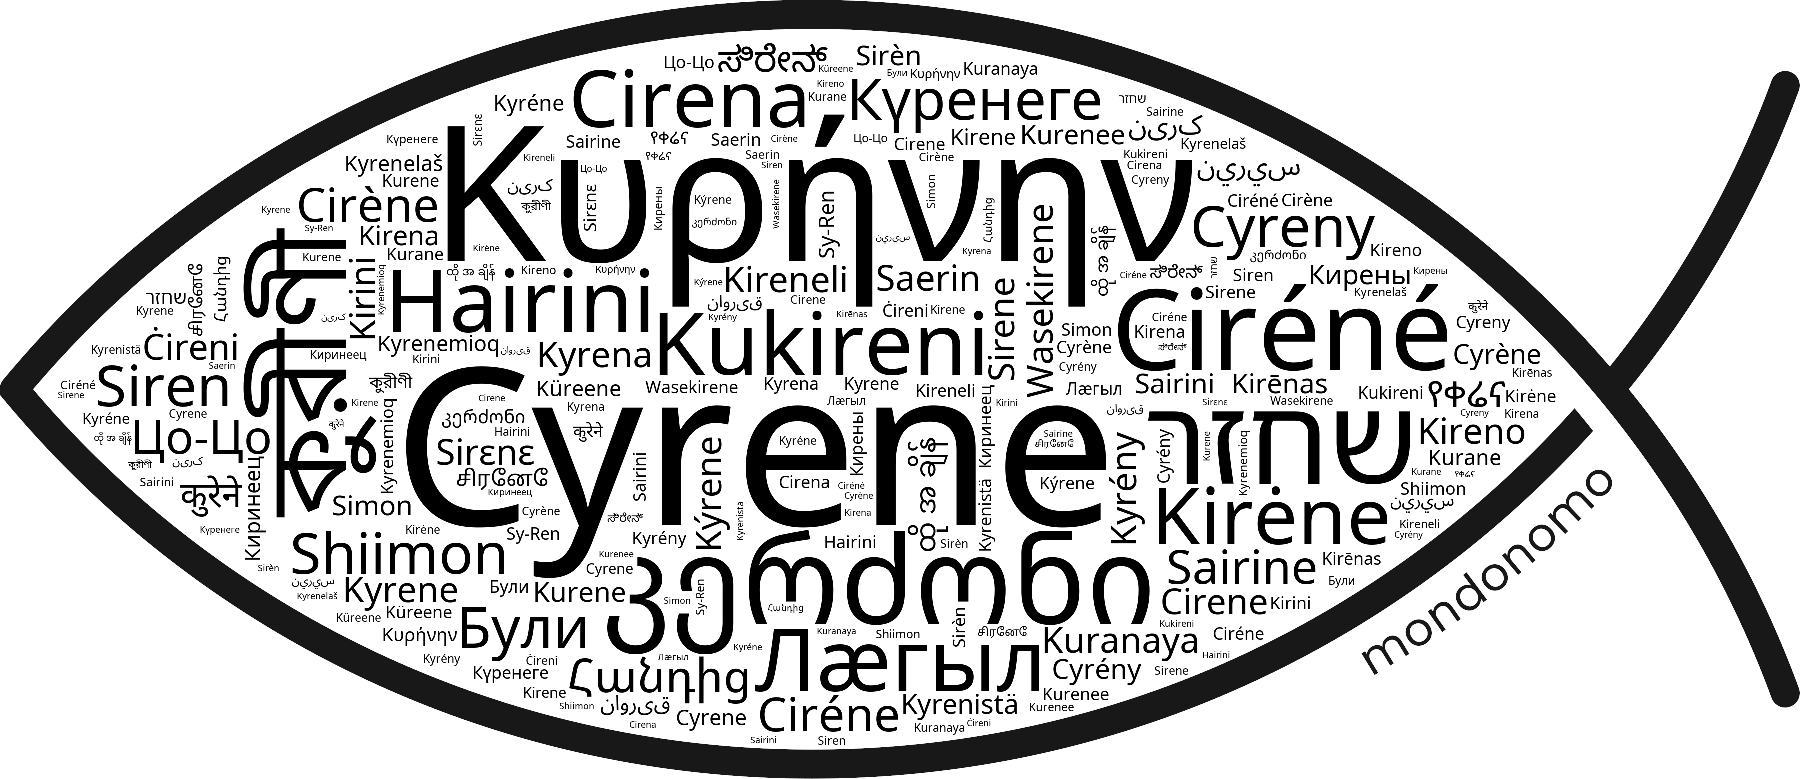 Name Cyrene in the world's Bibles